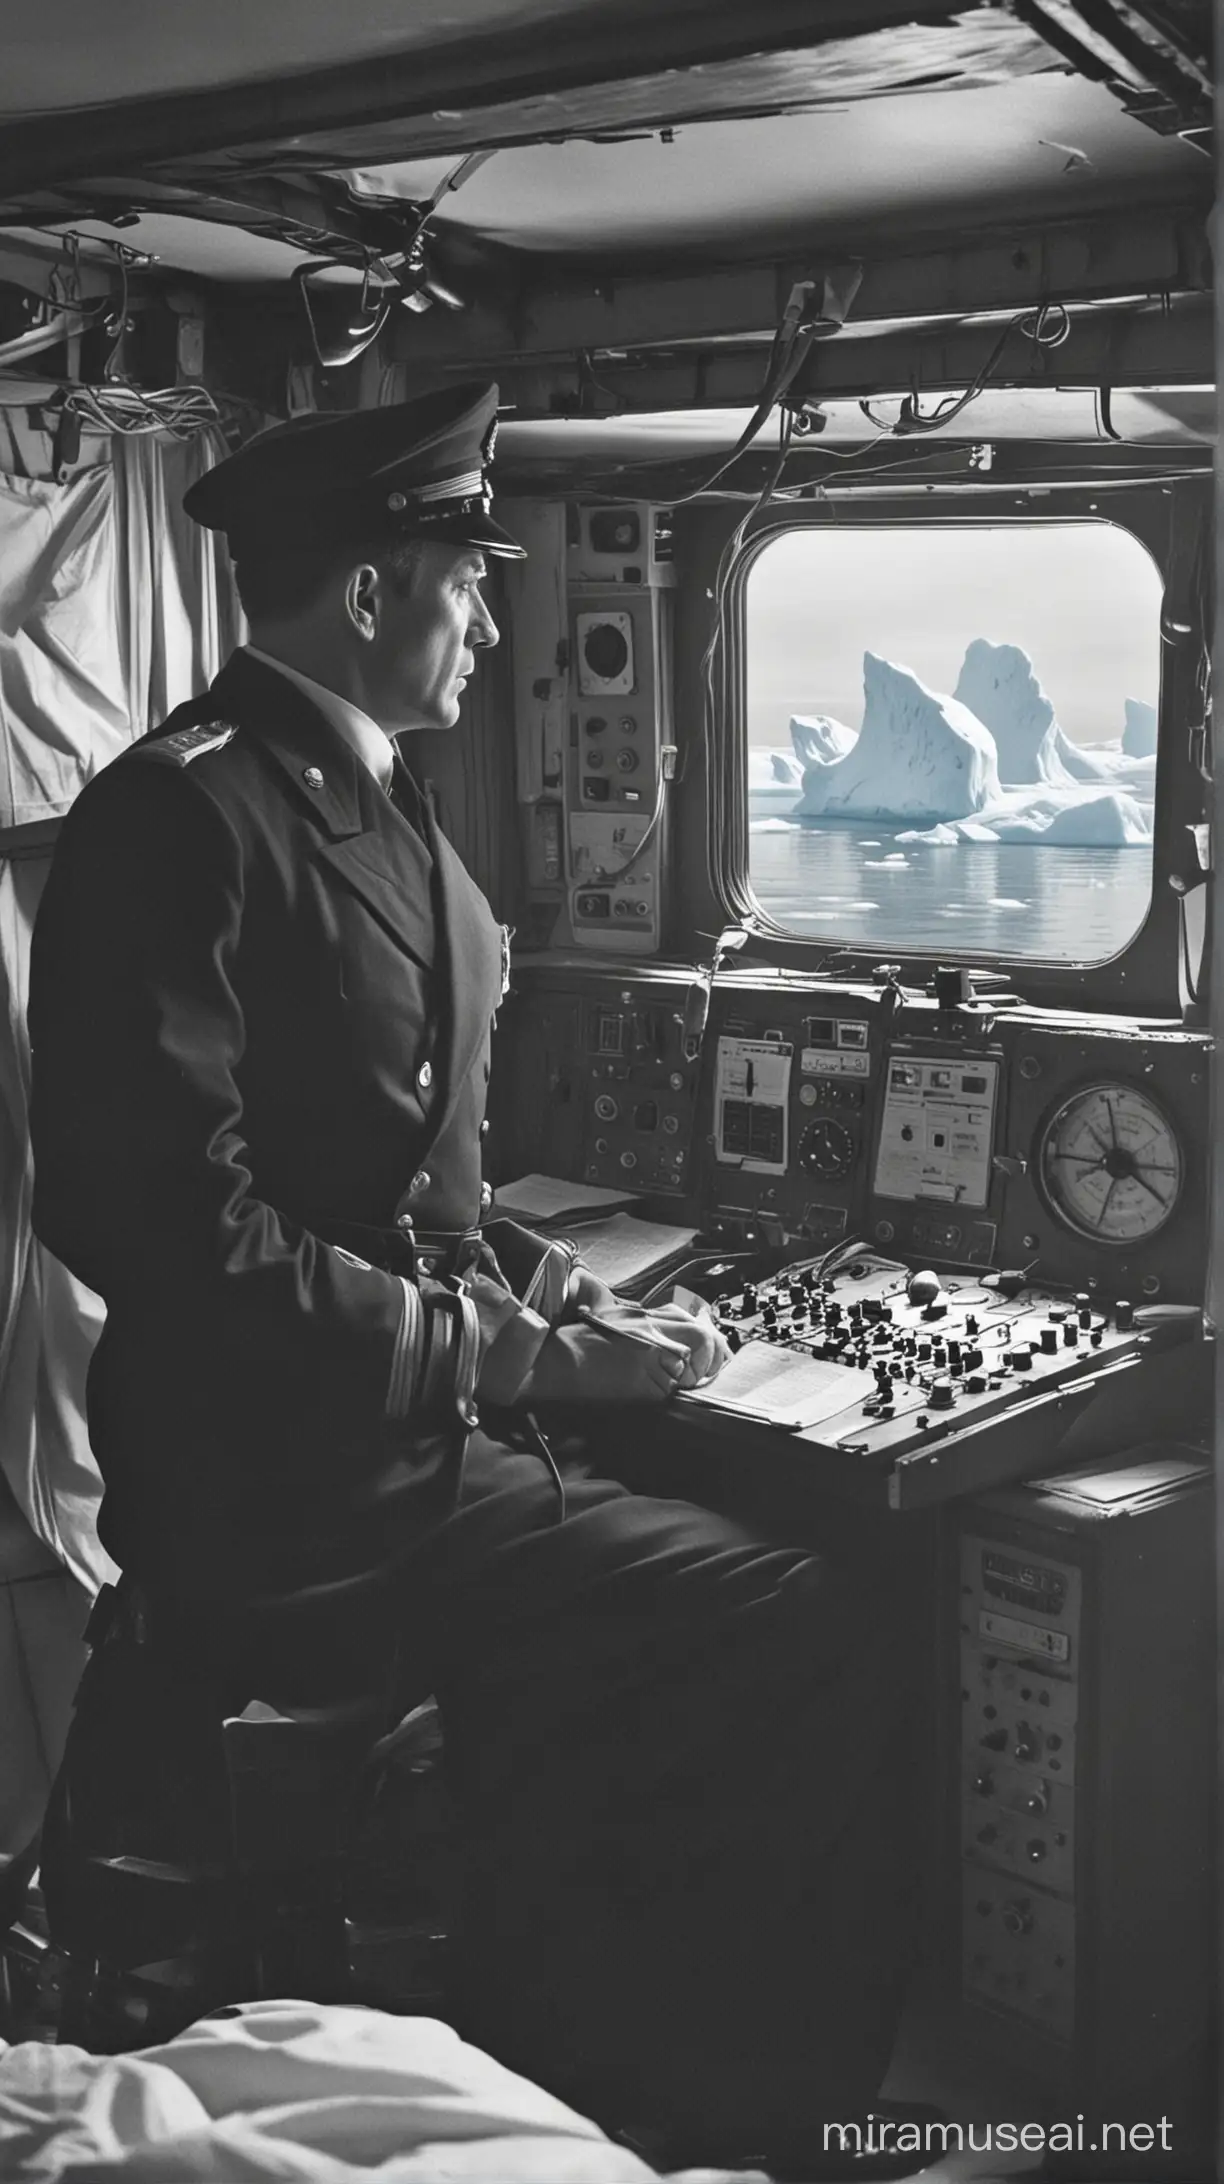 Captain Lord Orders Radio Operator to Alert Ships About Icebergs